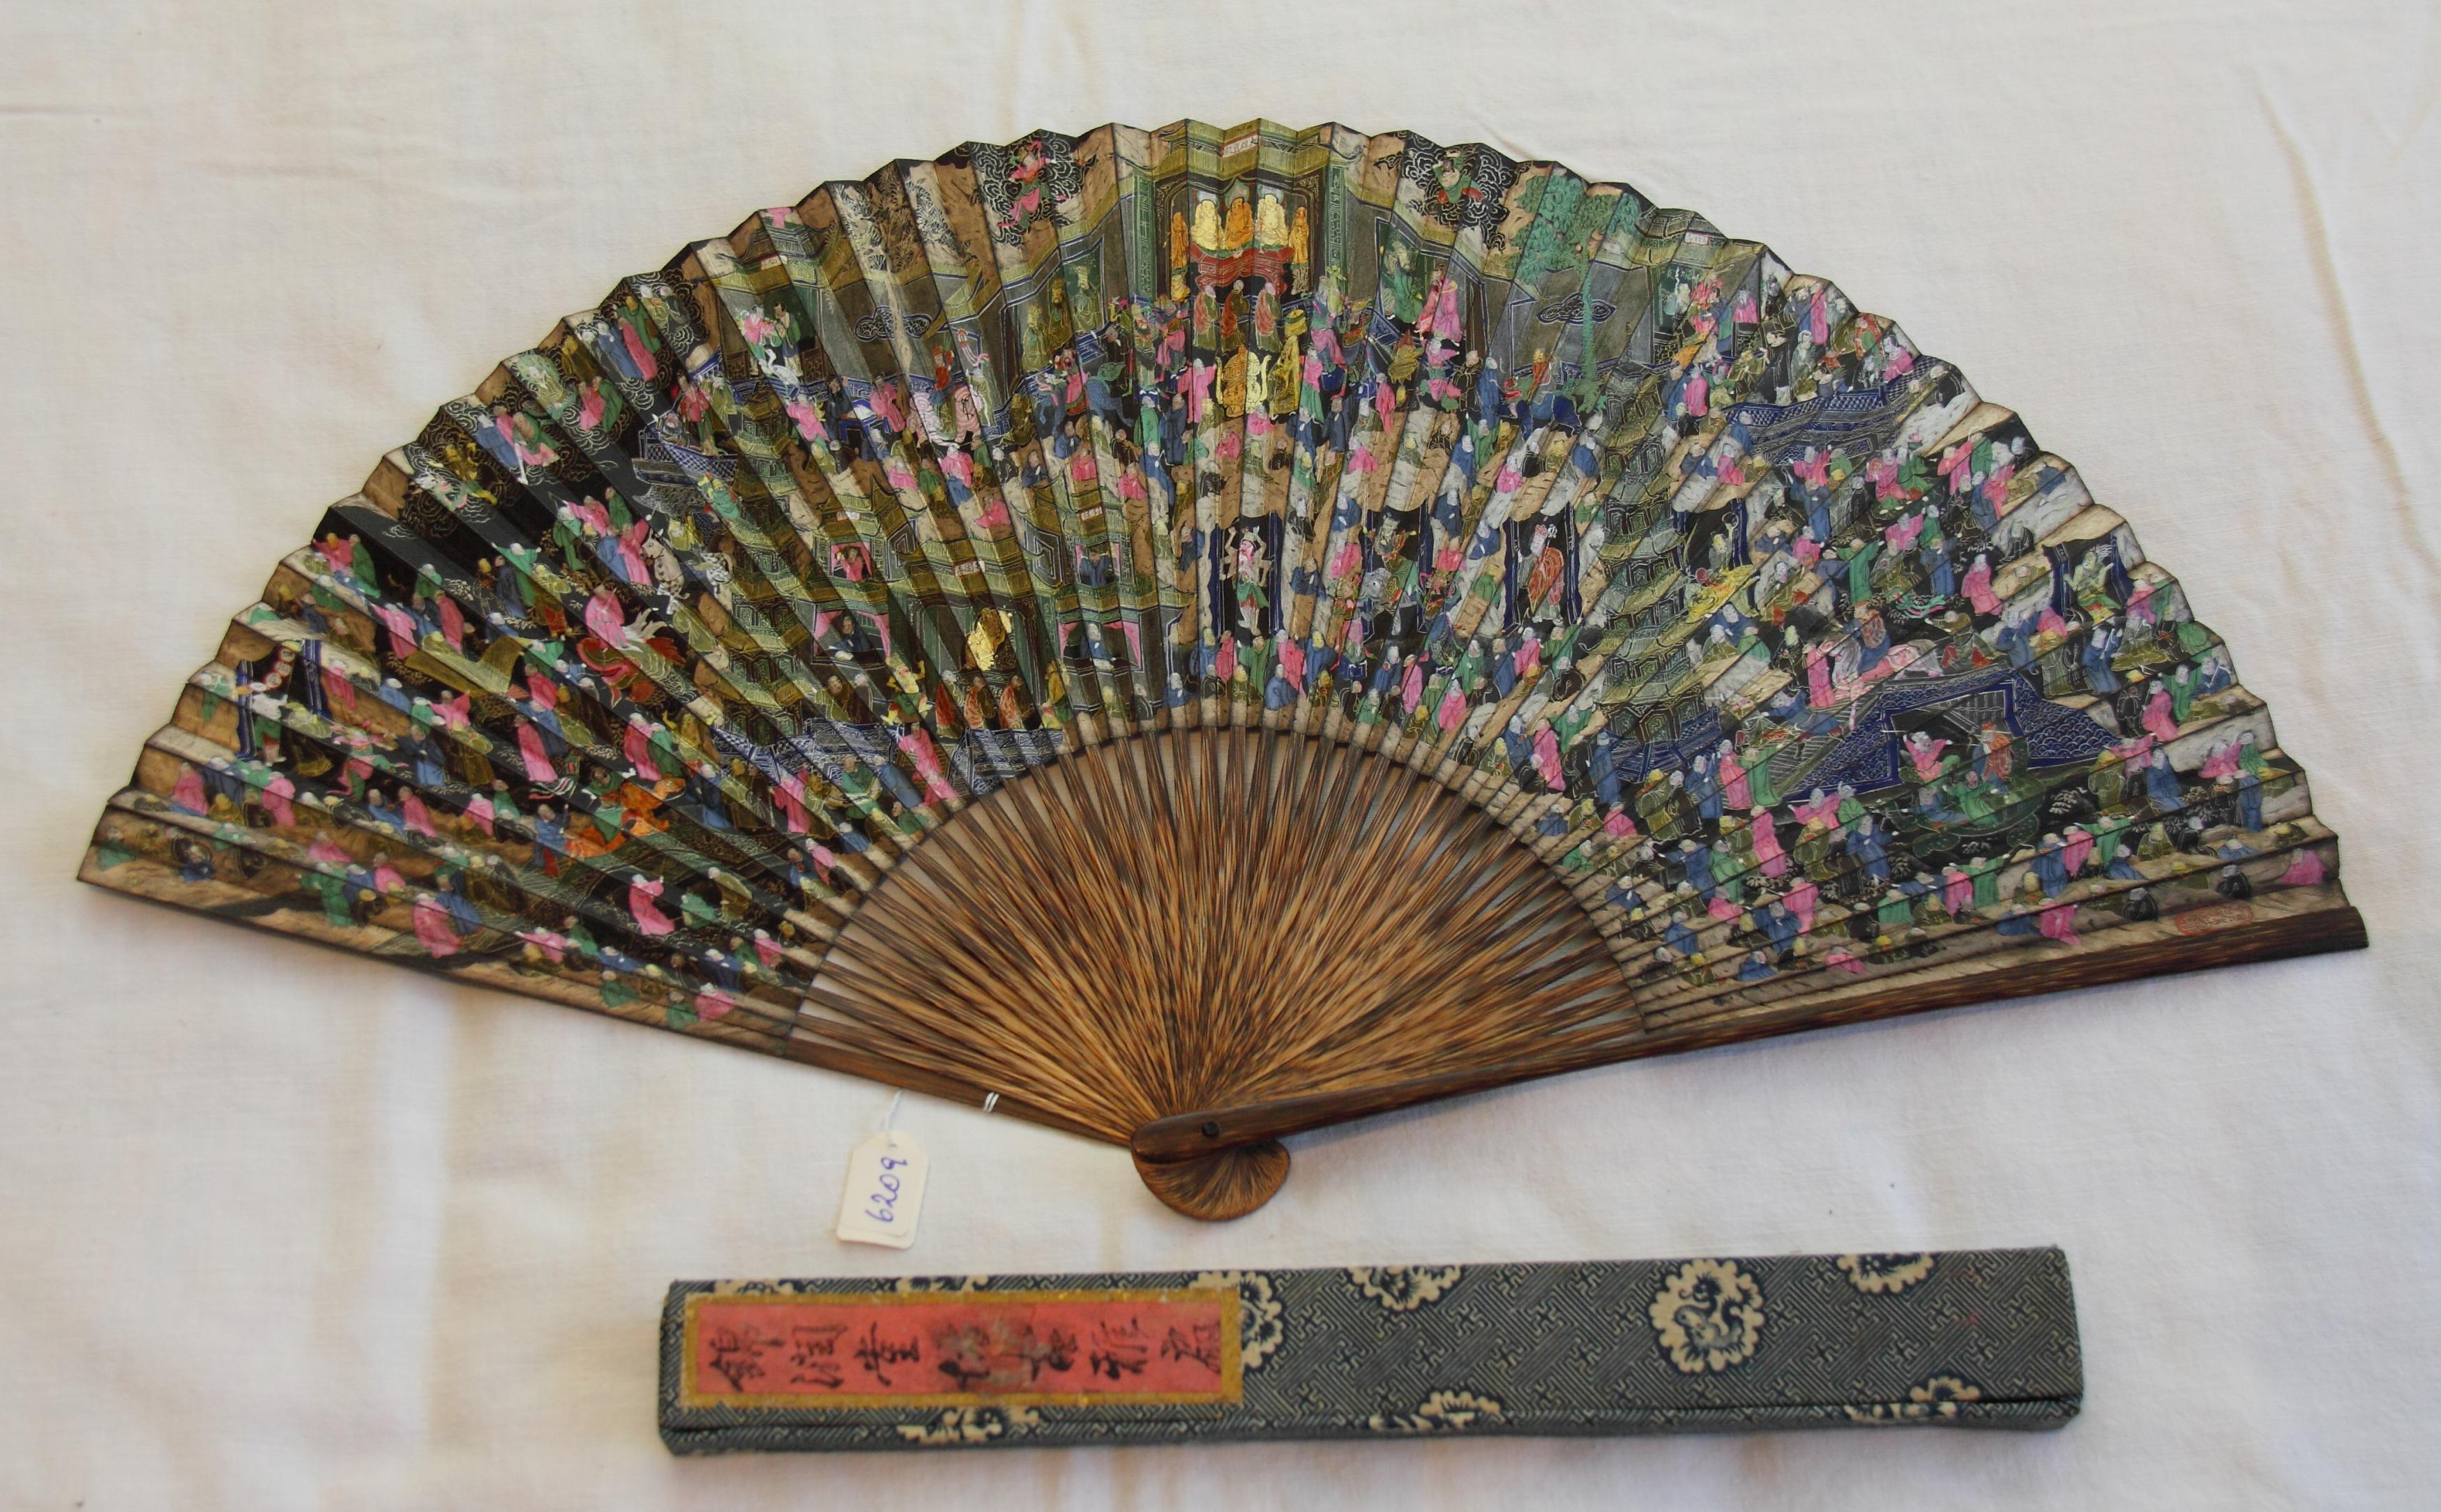 FAN WITH GENRE SCENES AND FAN FROM SHU LIAN JI WITH VIEWS OF THE WEST LAKE AND BUDDHIST TEMPLES. - Image 3 of 14